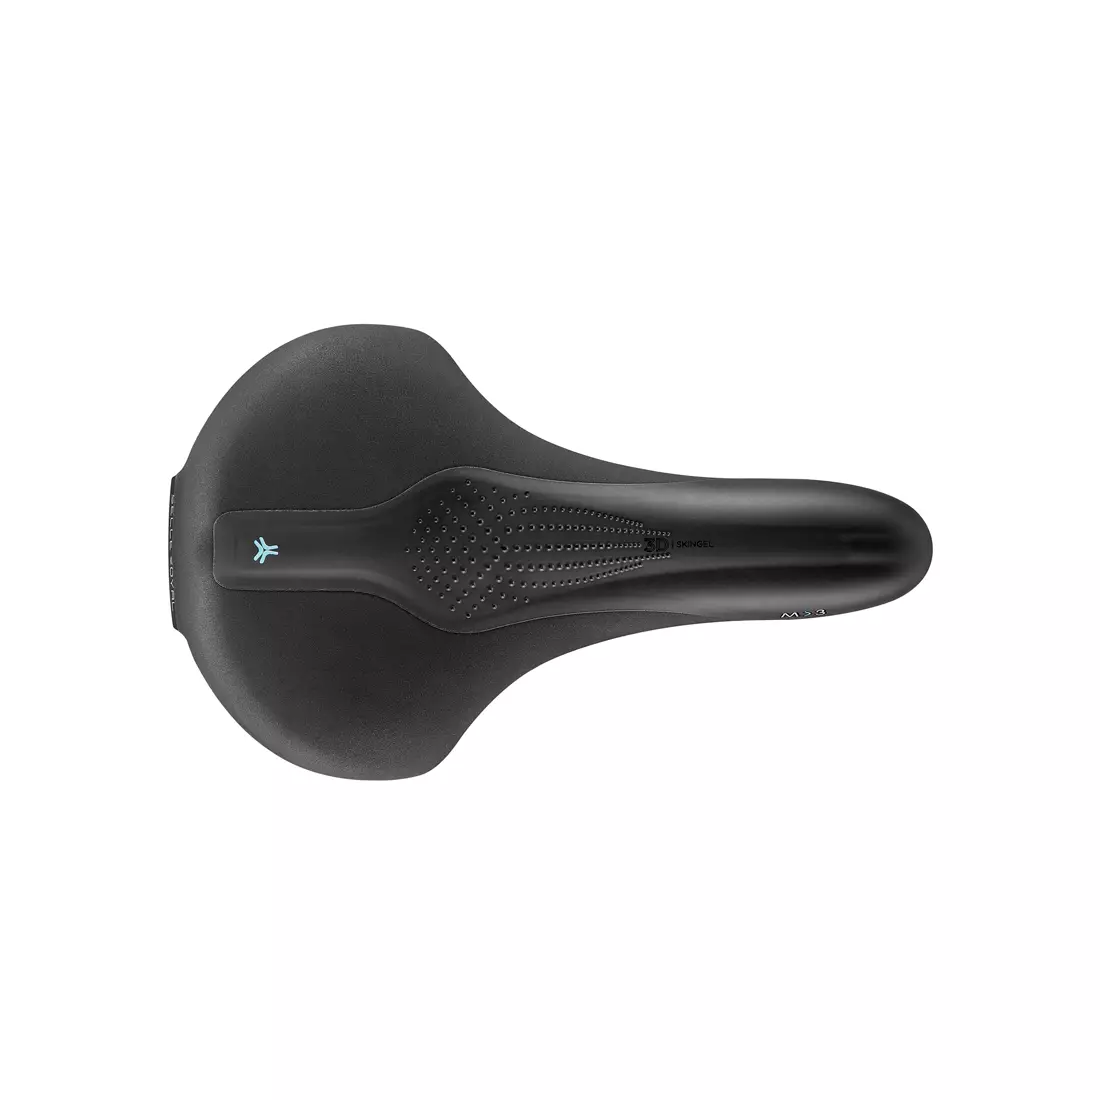 SELLEROYAL SCIENTIA MODERATE M3 LARGE bicycle saddle 60st. gel + elastomers unisex SR-54M0LB0A09210